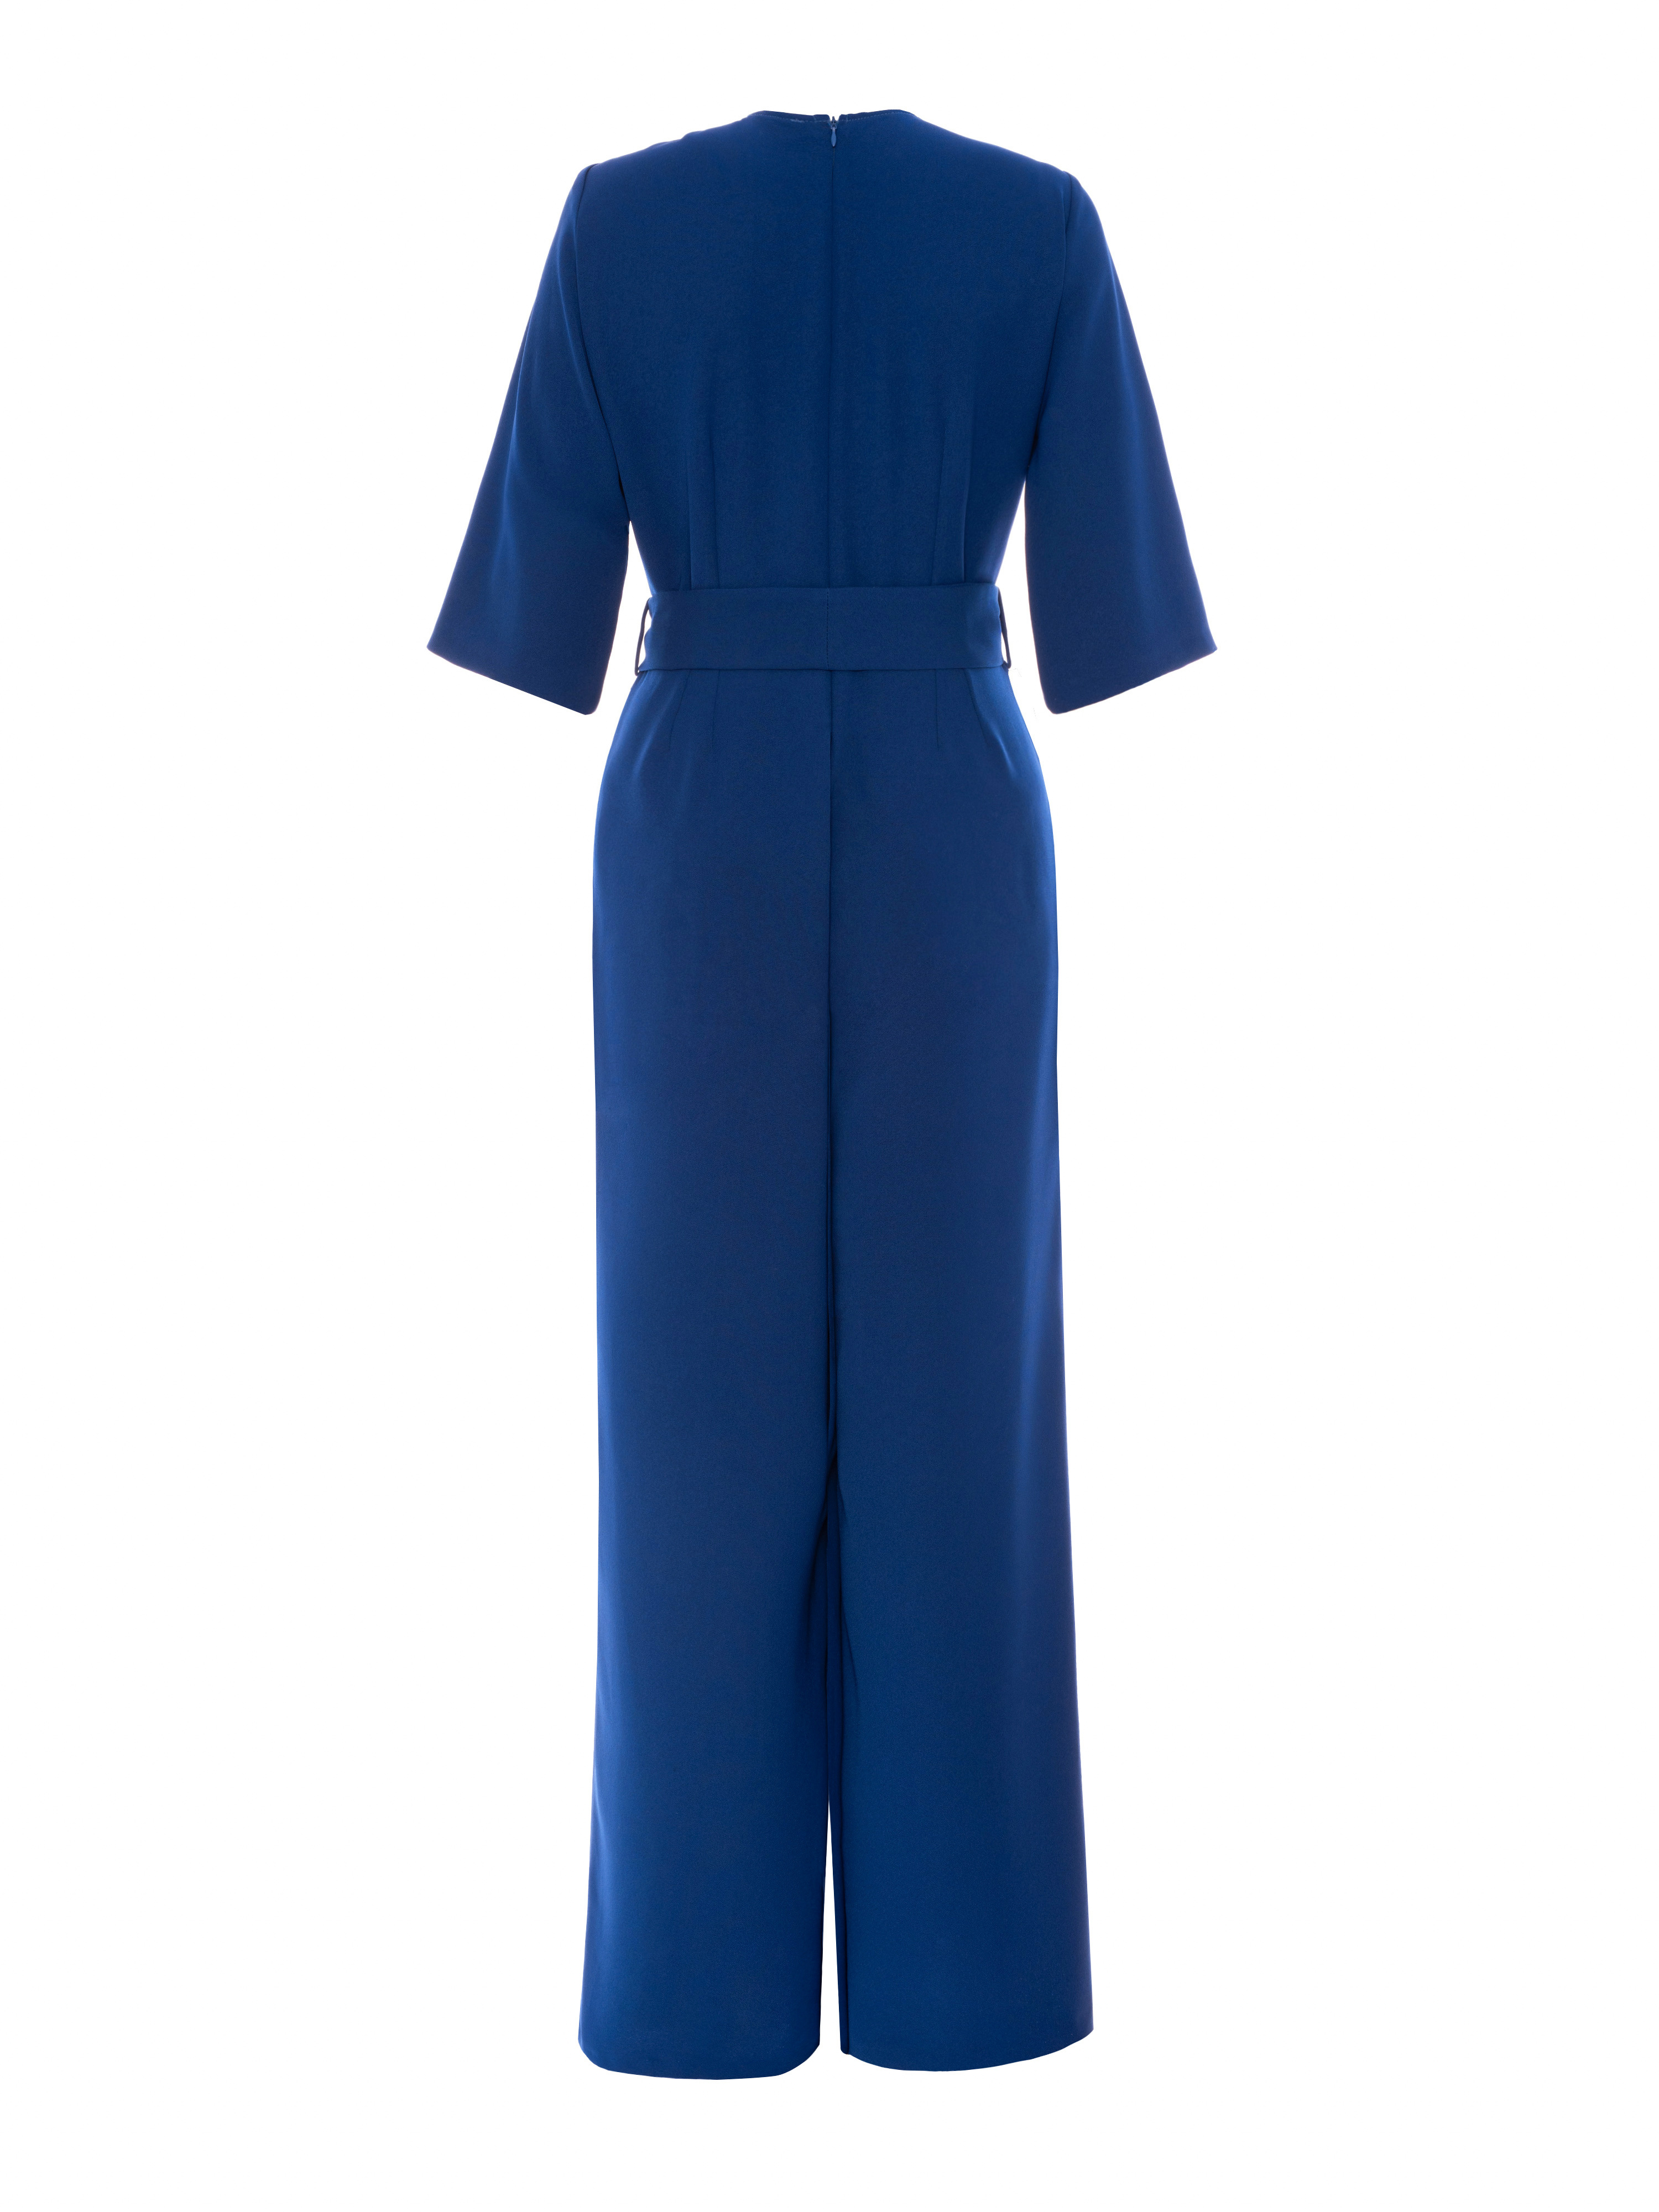 Double-breasted jumpsuit | SALE \ Show All SALE \ Overalls + \ ELEGANCJA